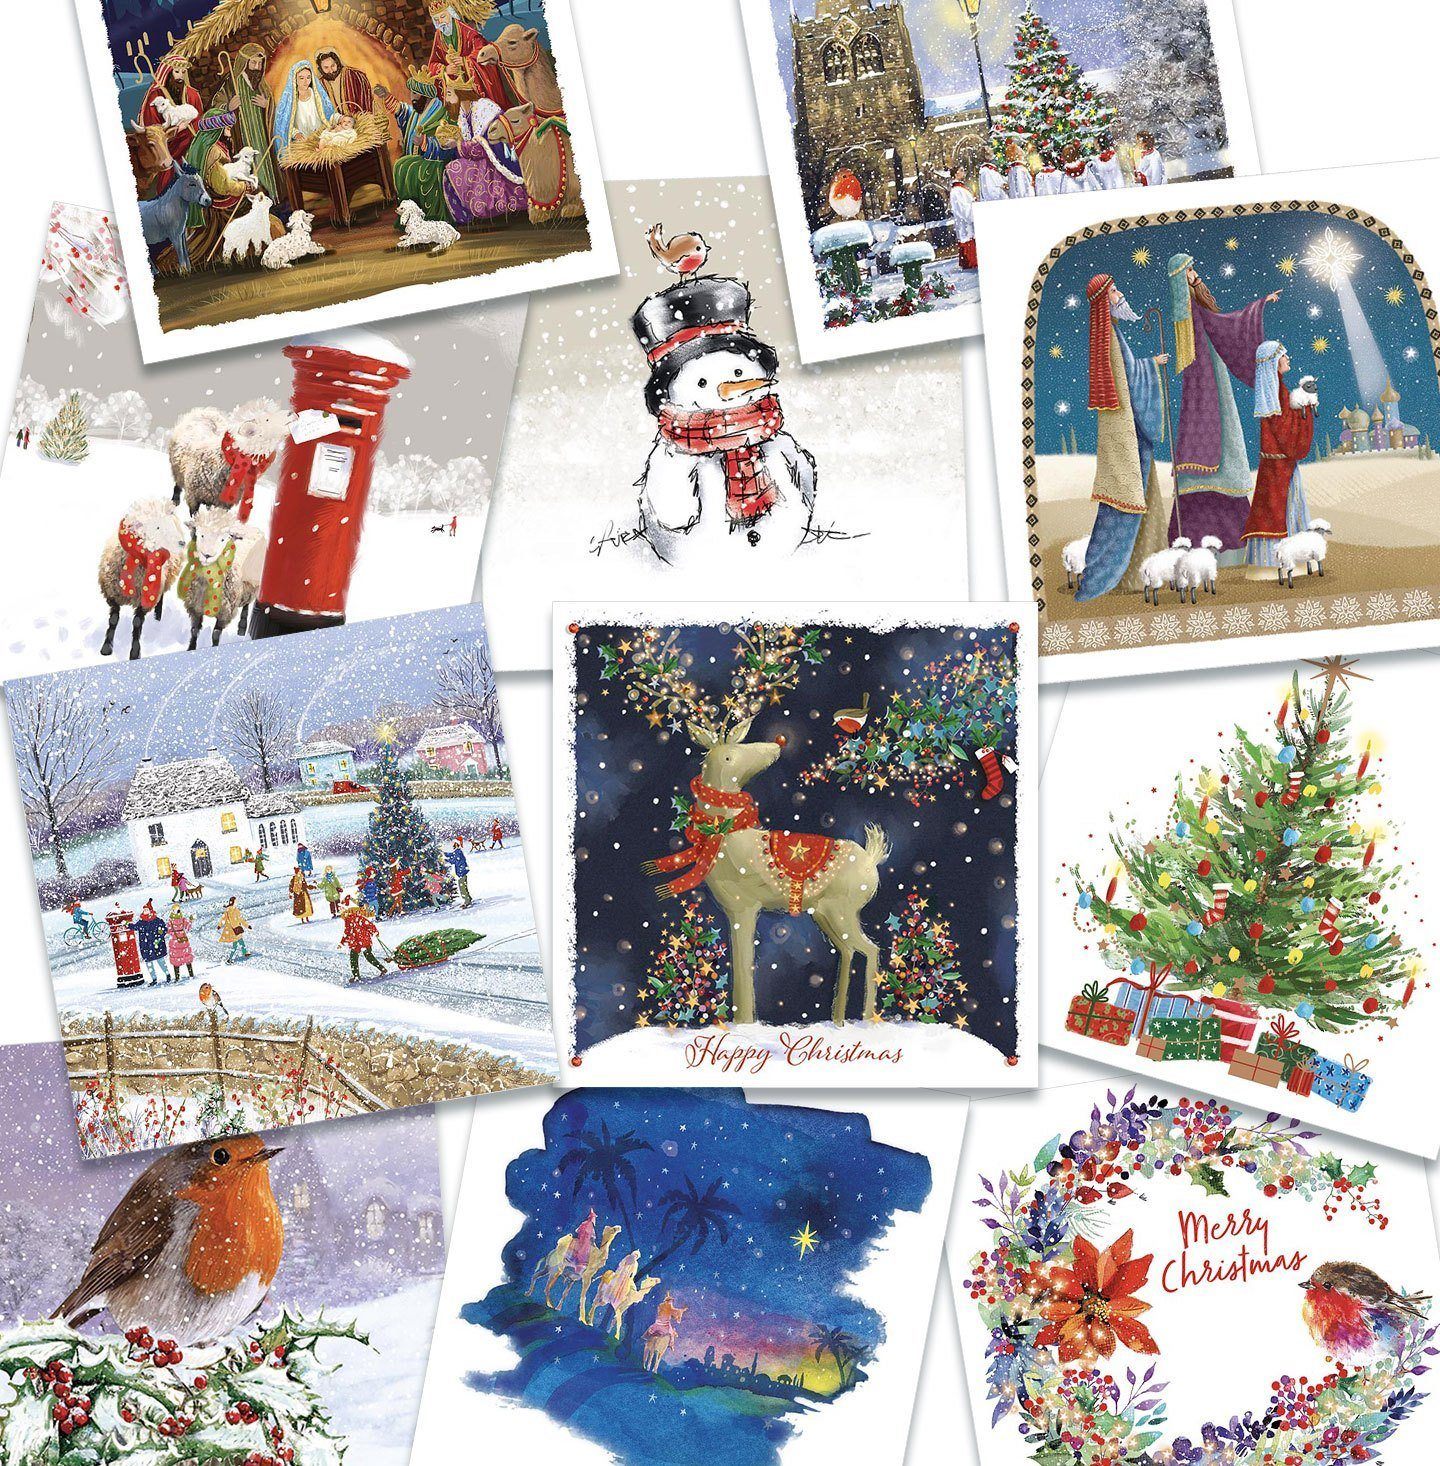 New Southwest Christmas Cards 2021 Pictures